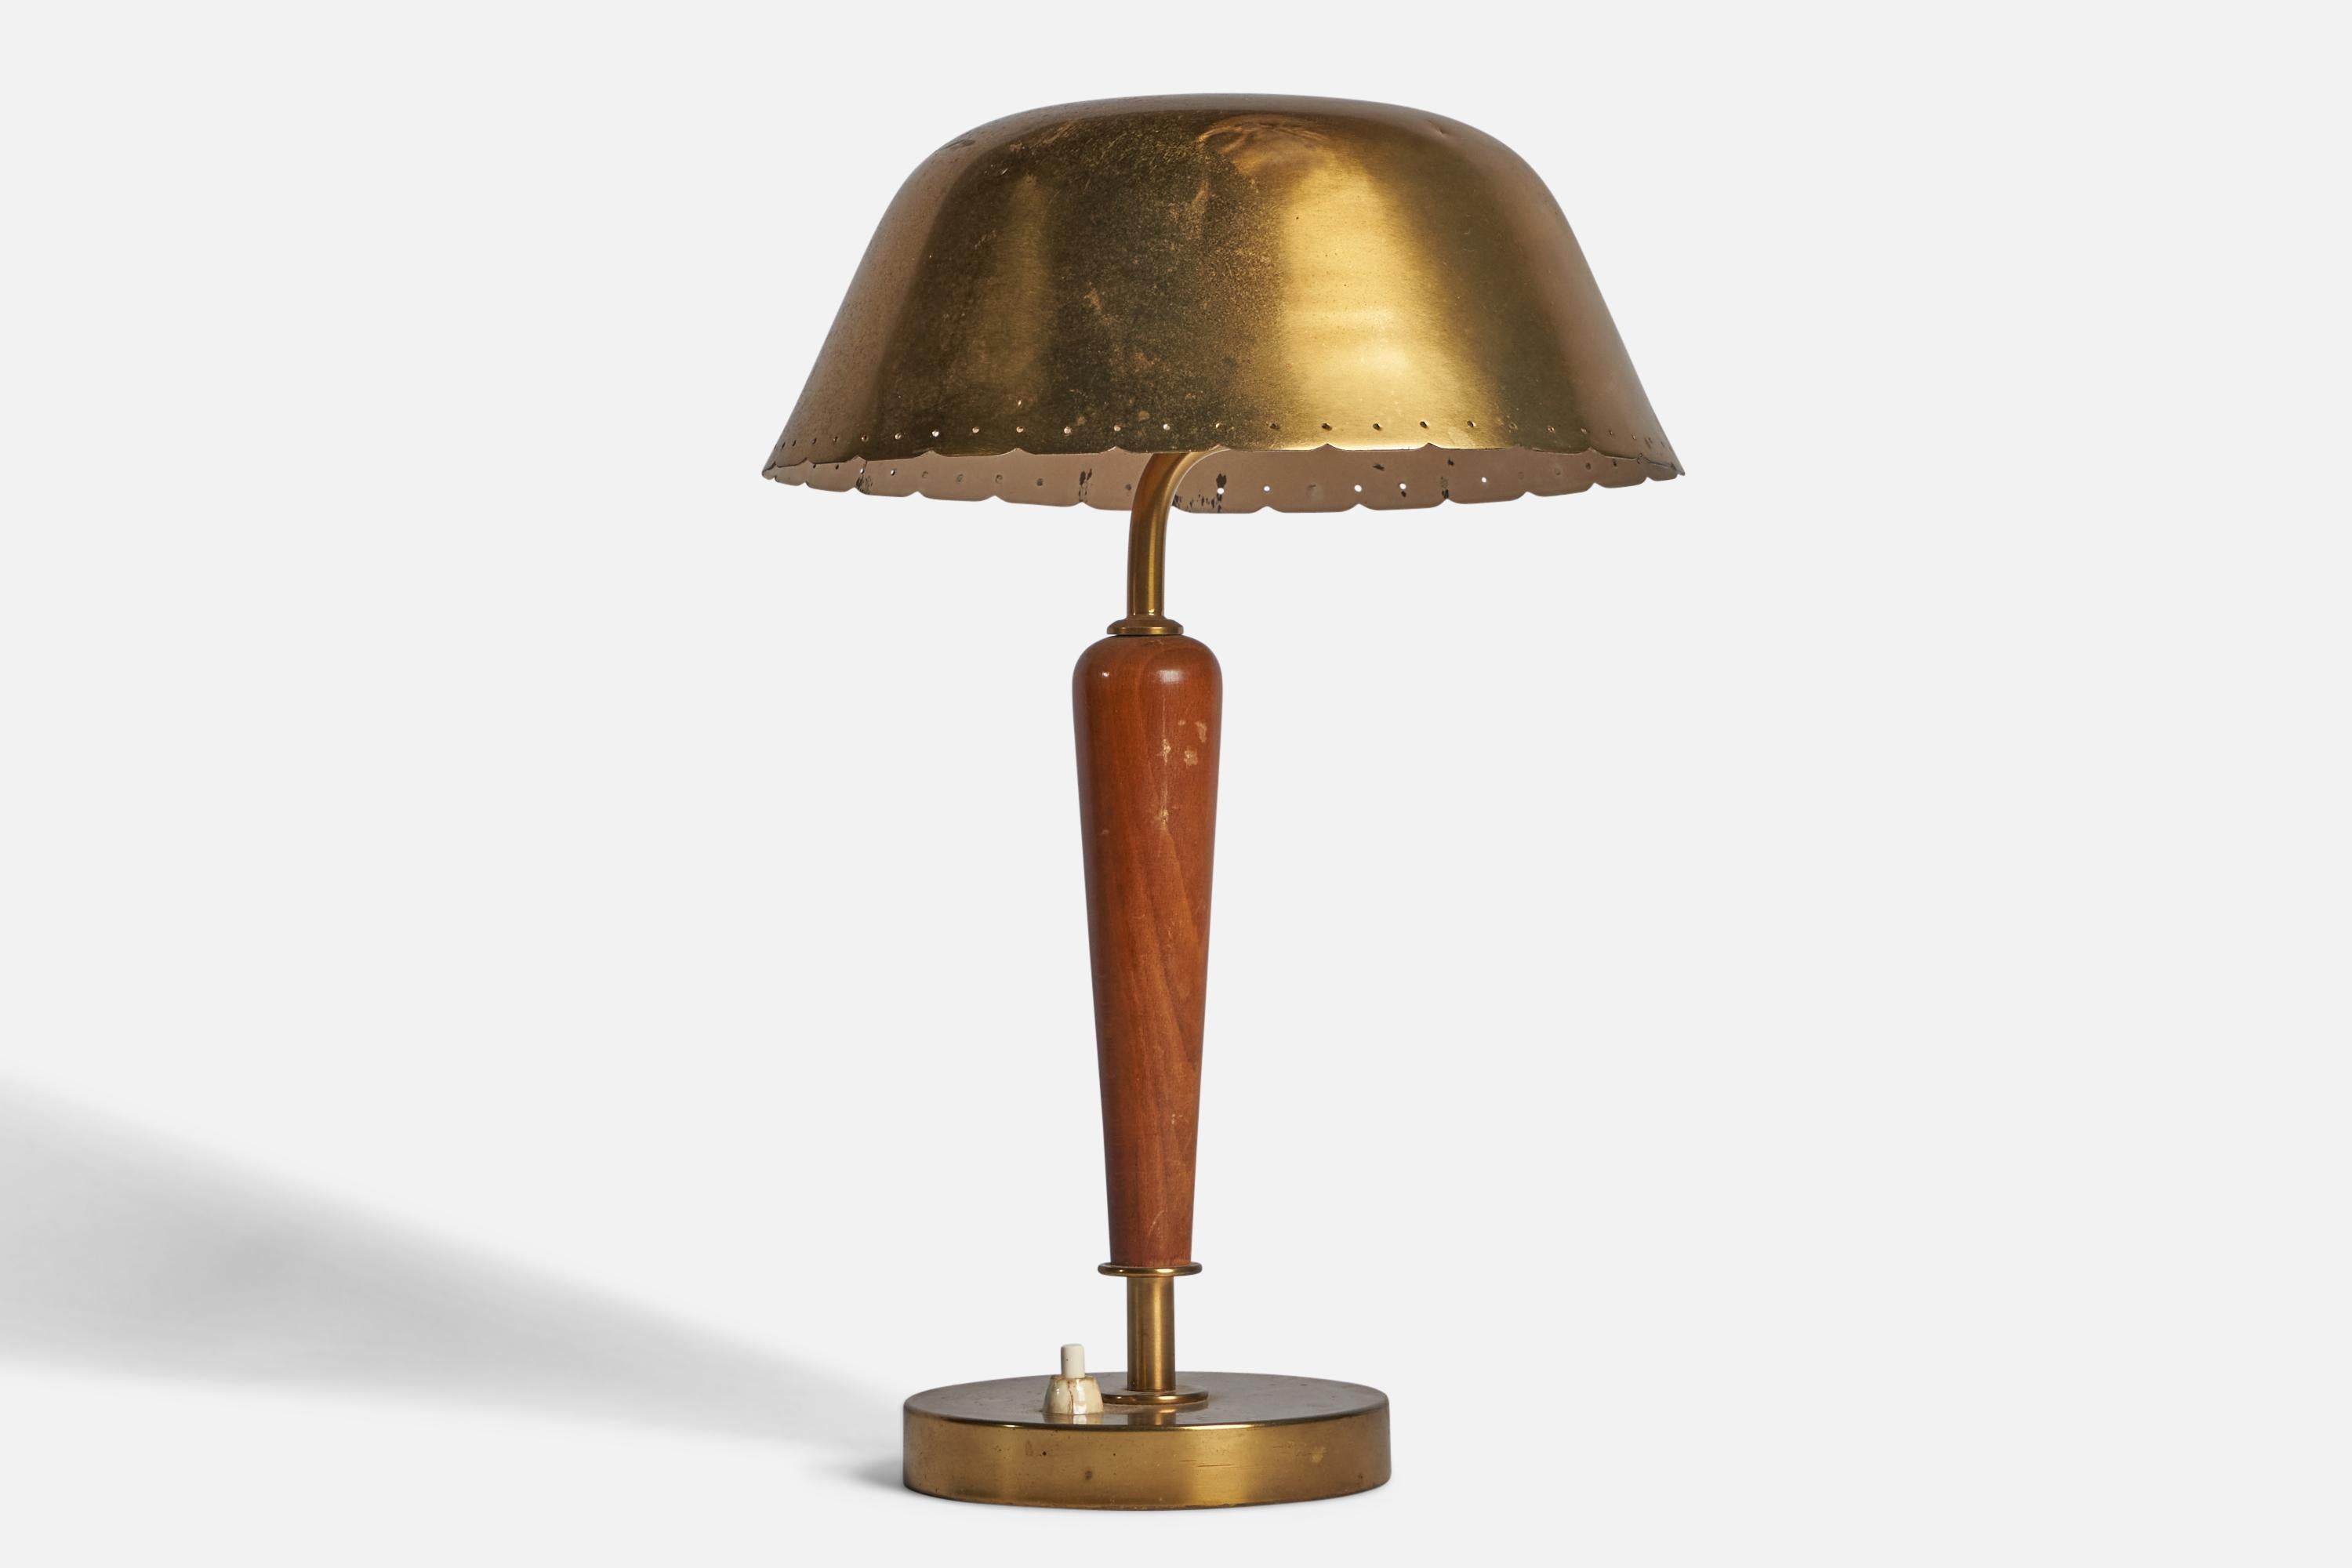 A brass and stained elm table lamp designed and produced in Sweden, 1930s.

Overall Dimensions (inches): 14.25” H x 9.25” Diameter
Bulb Specifications: E-26 Bulb
Number of Sockets: 1
All lighting will be converted for US usage. We are unable to